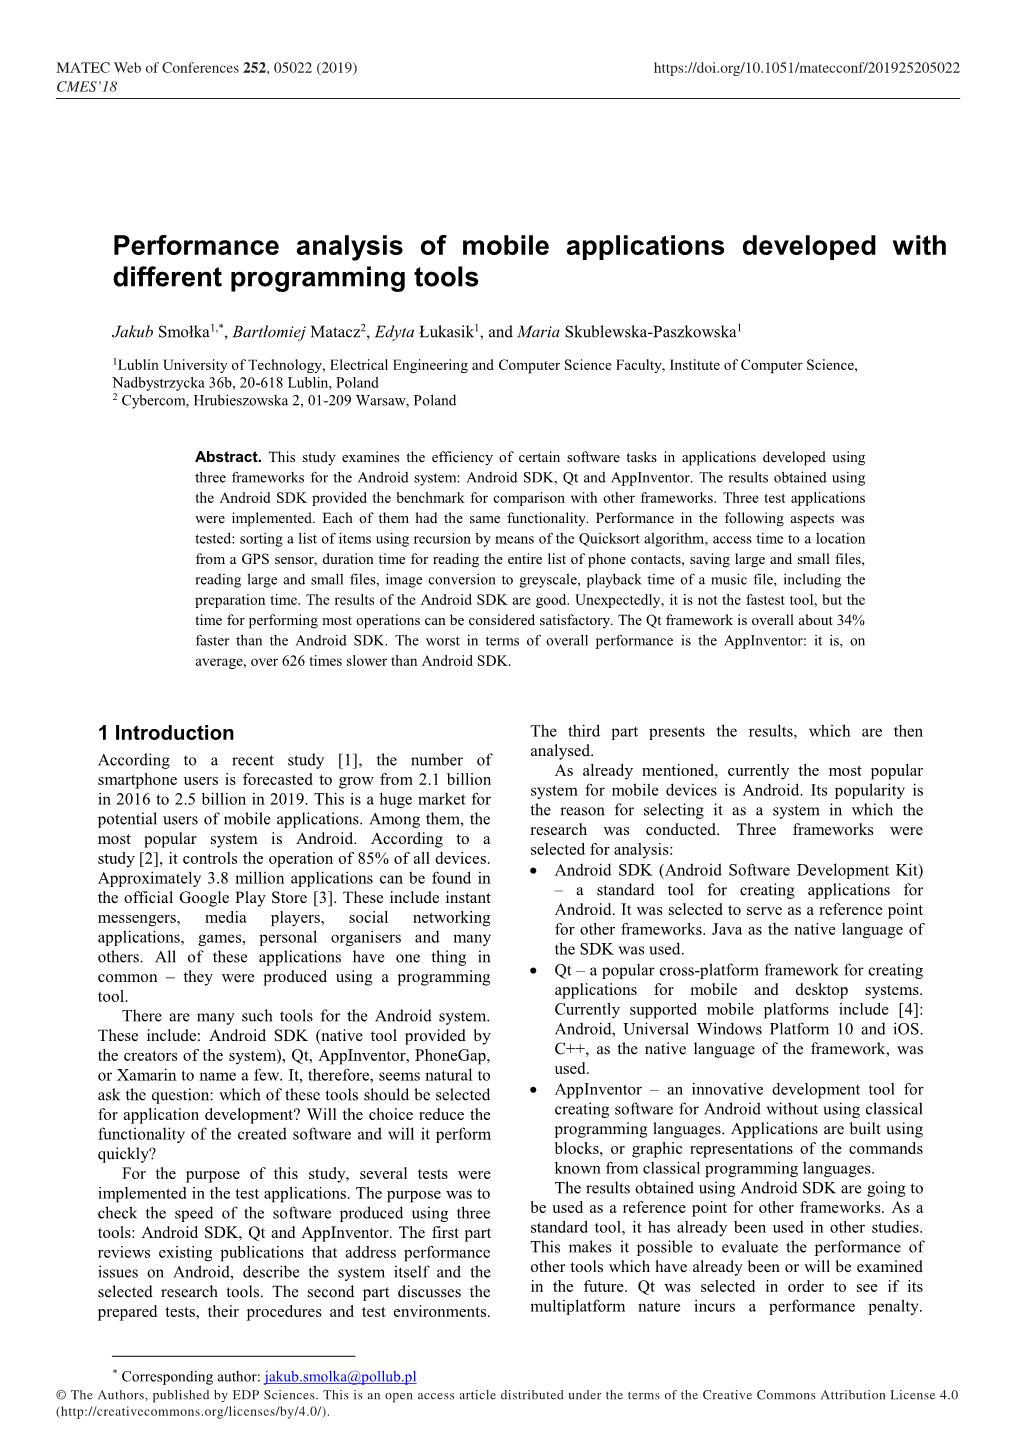 Performance Analysis of Mobile Applications Developed with Different Programming Tools